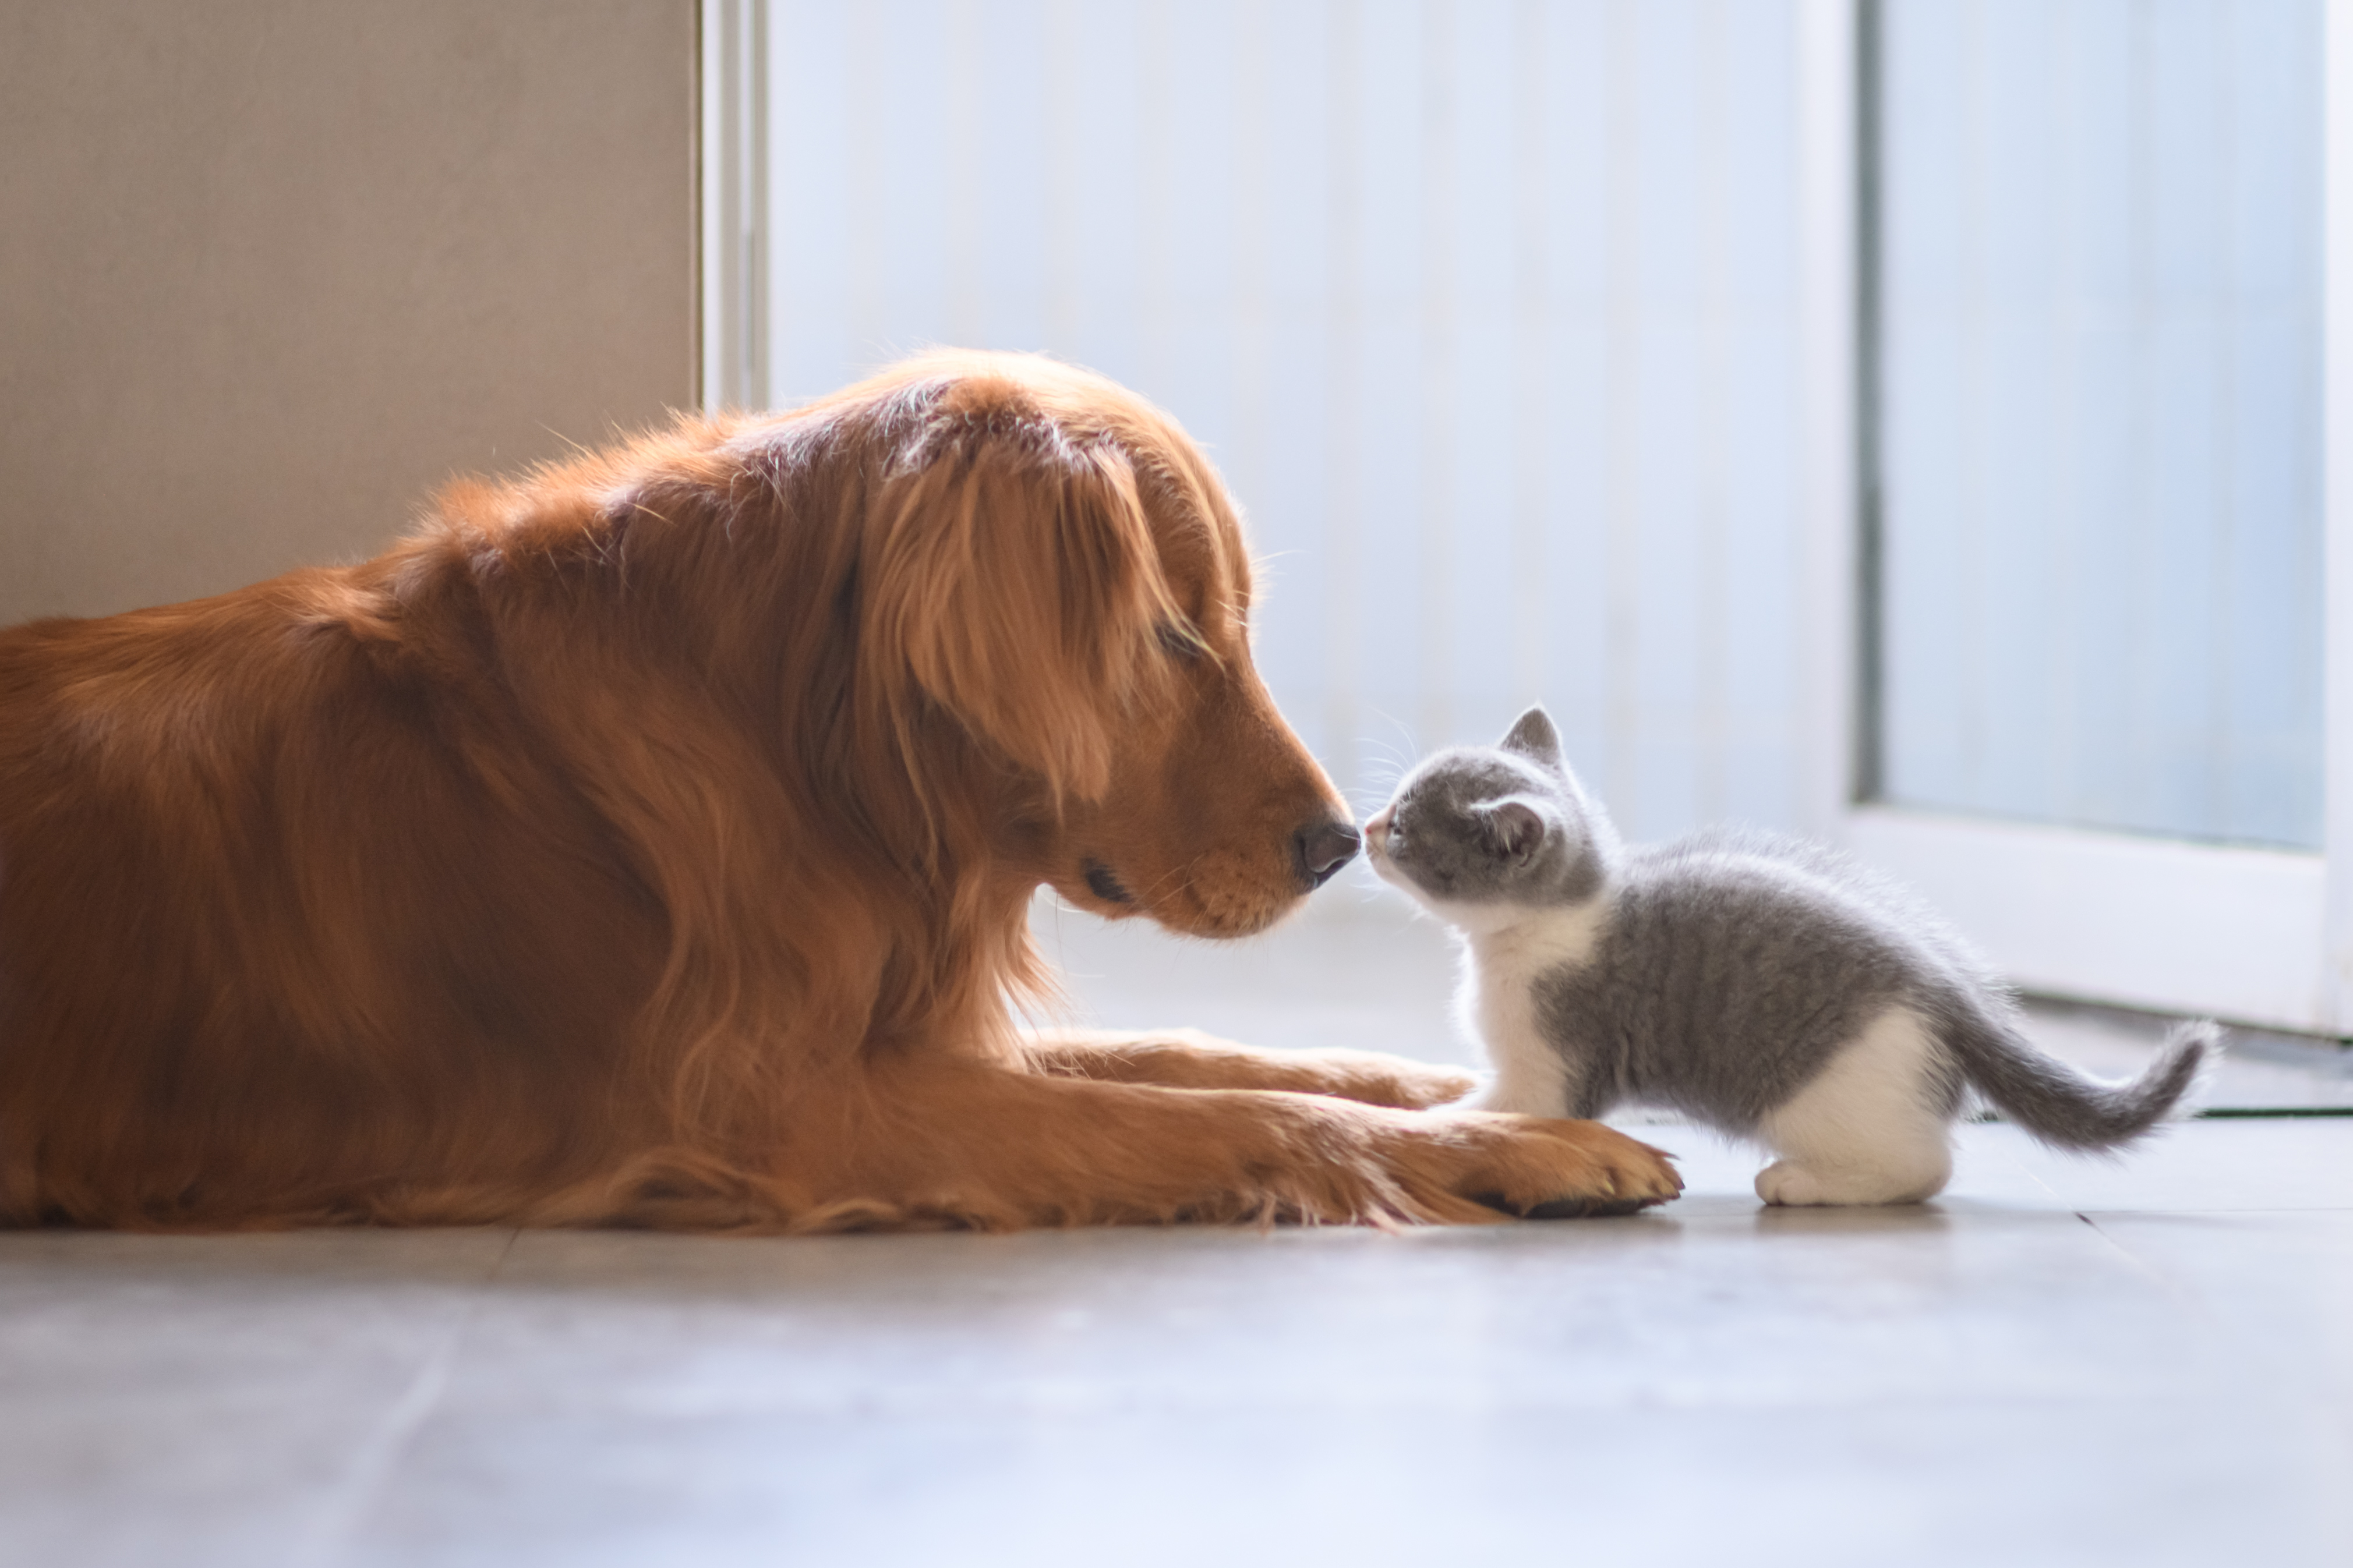 A dog and a kitten meeting nose to nose in a kitchen